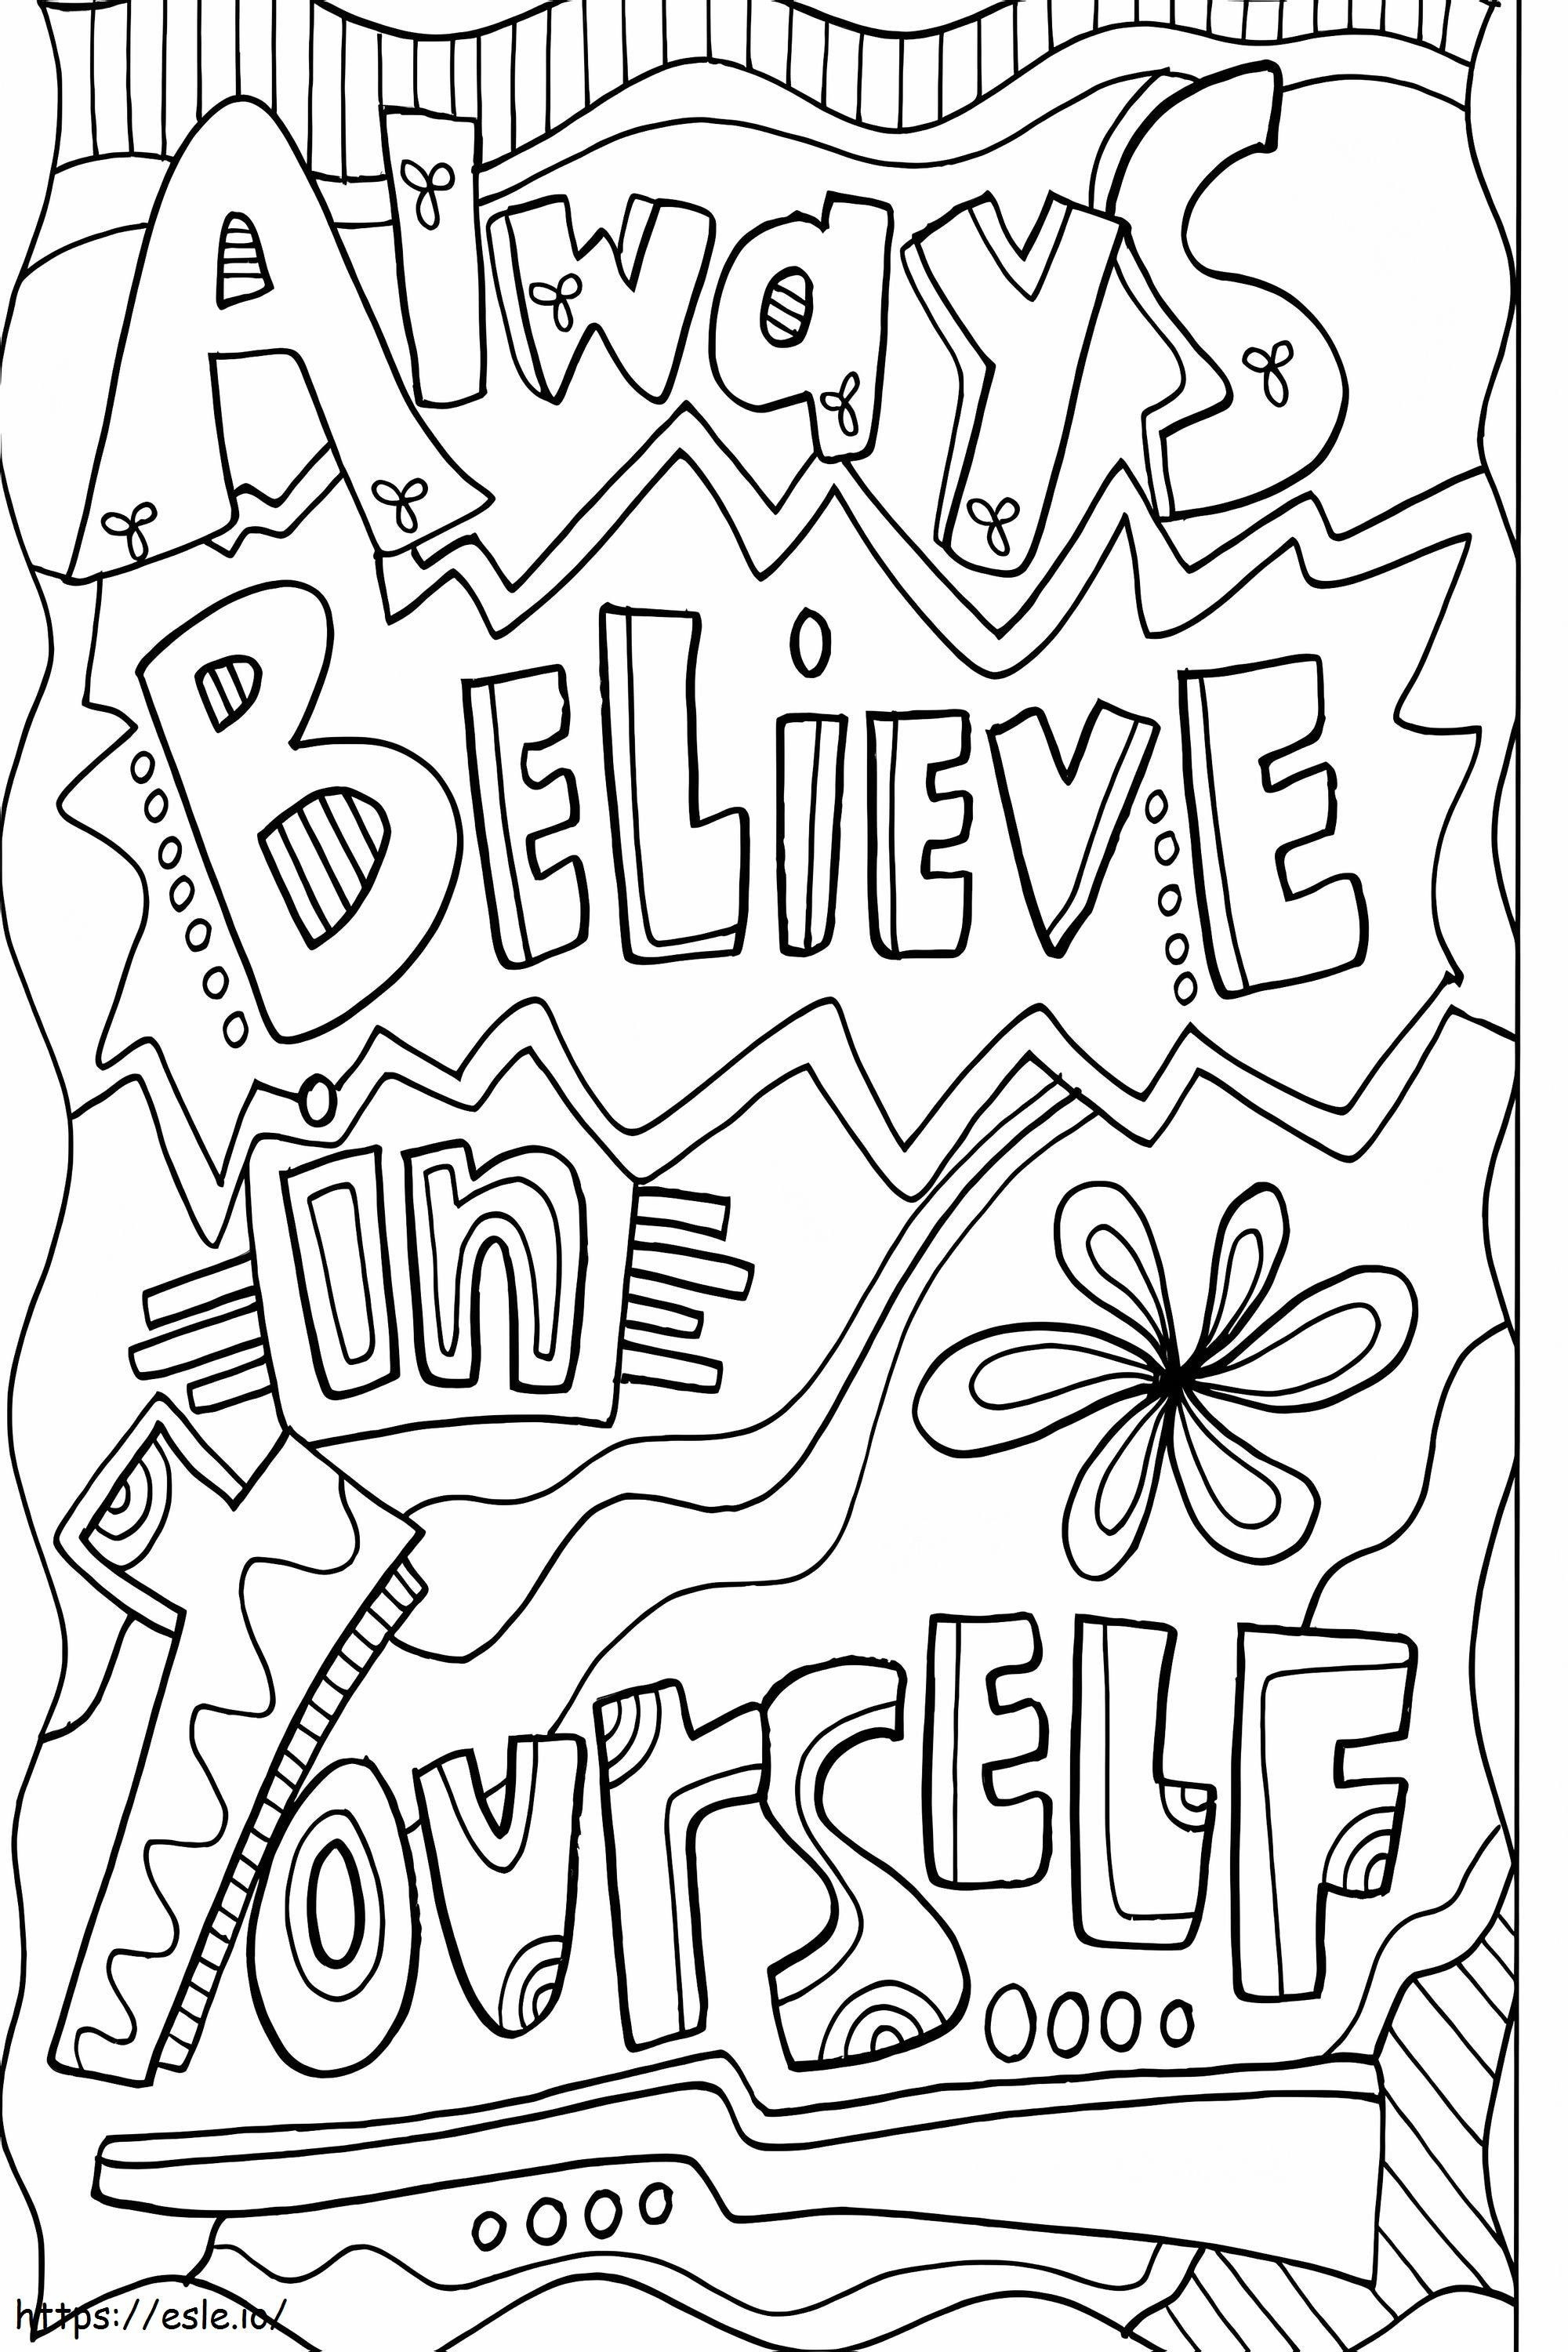 Positive Quote coloring page